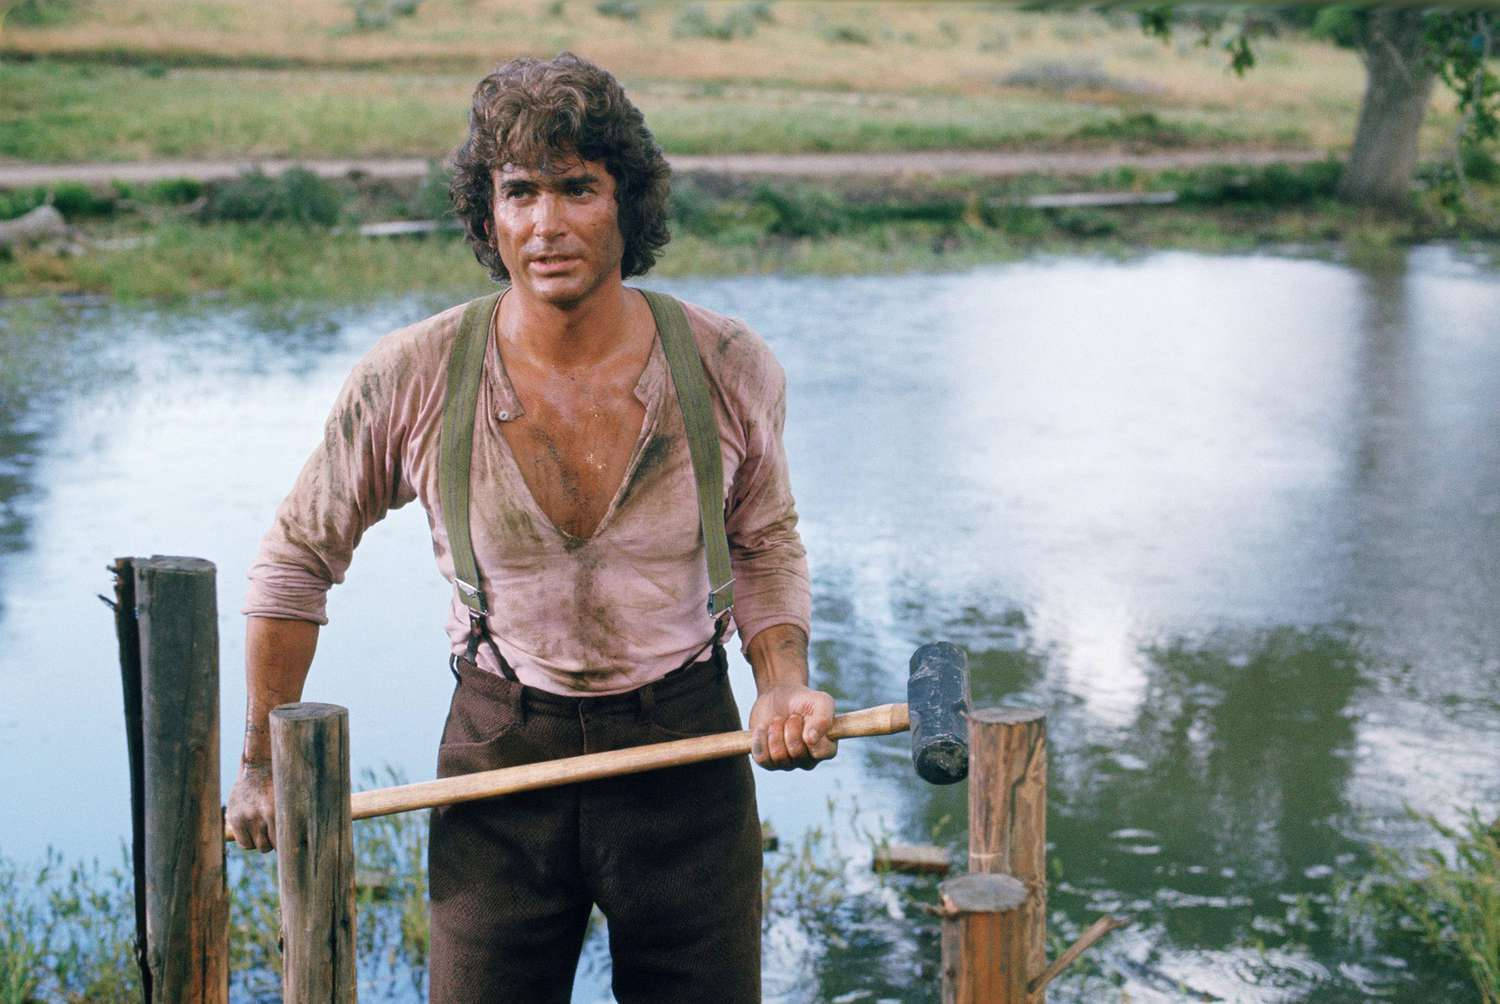 Michael Landon as Charles Ingalls portraying intensity and resilience Wallpaper